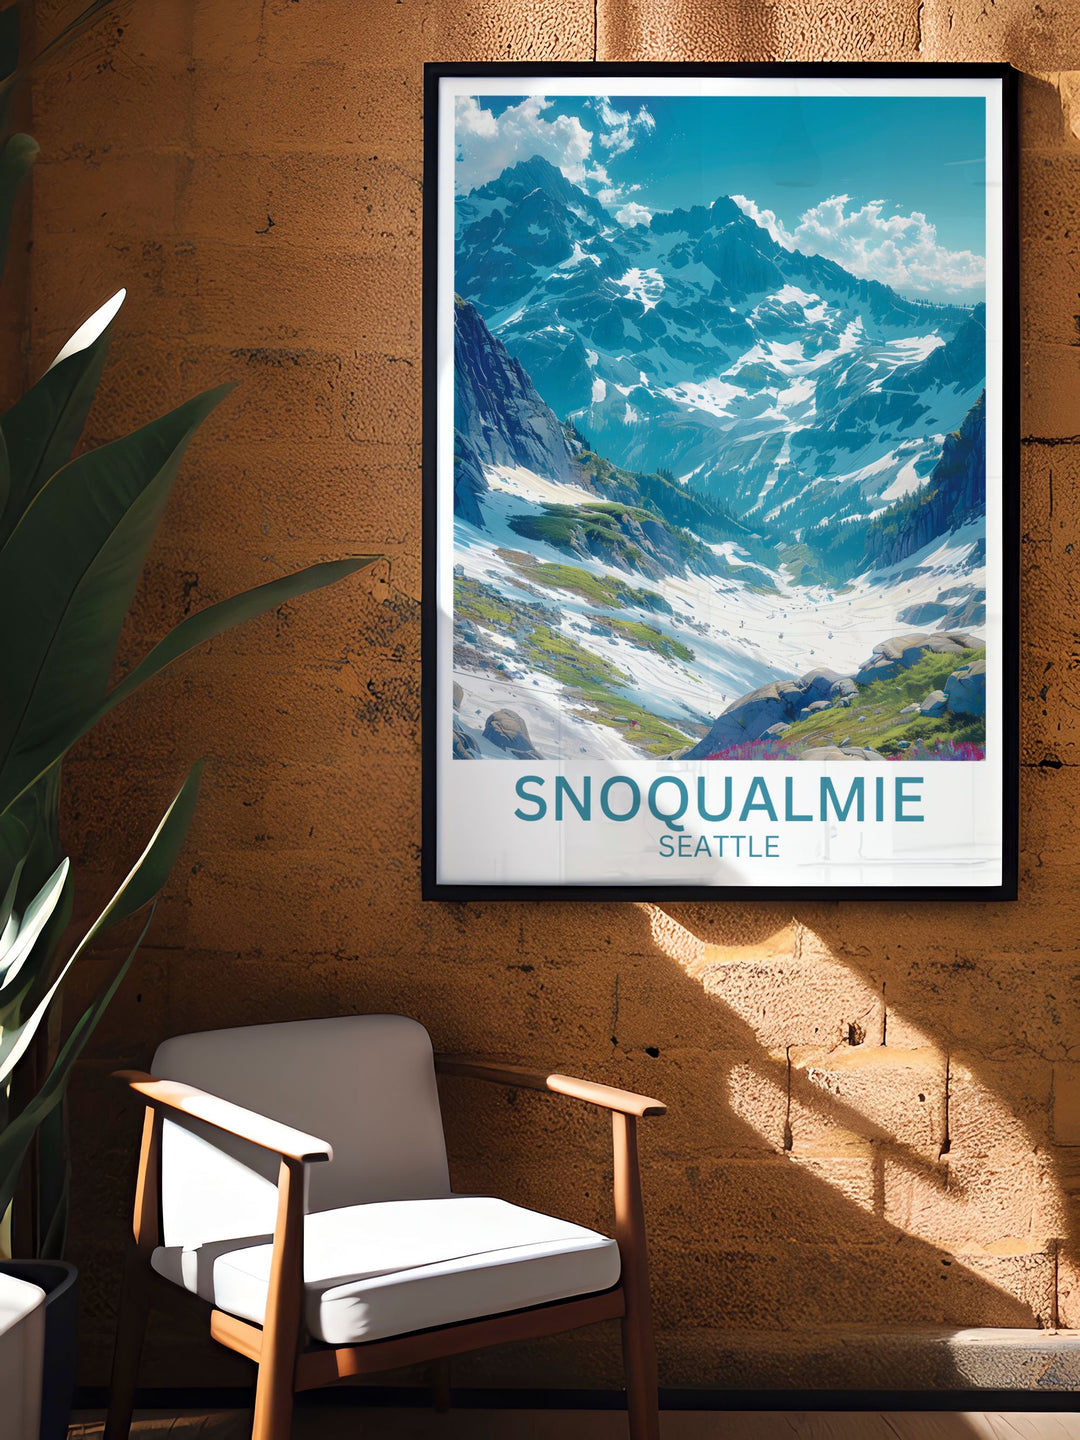 Immerse yourself in the adventurous spirit of Snoqualmie with this travel poster, highlighting the iconic slopes of Alpental and the surrounding alpine beauty.